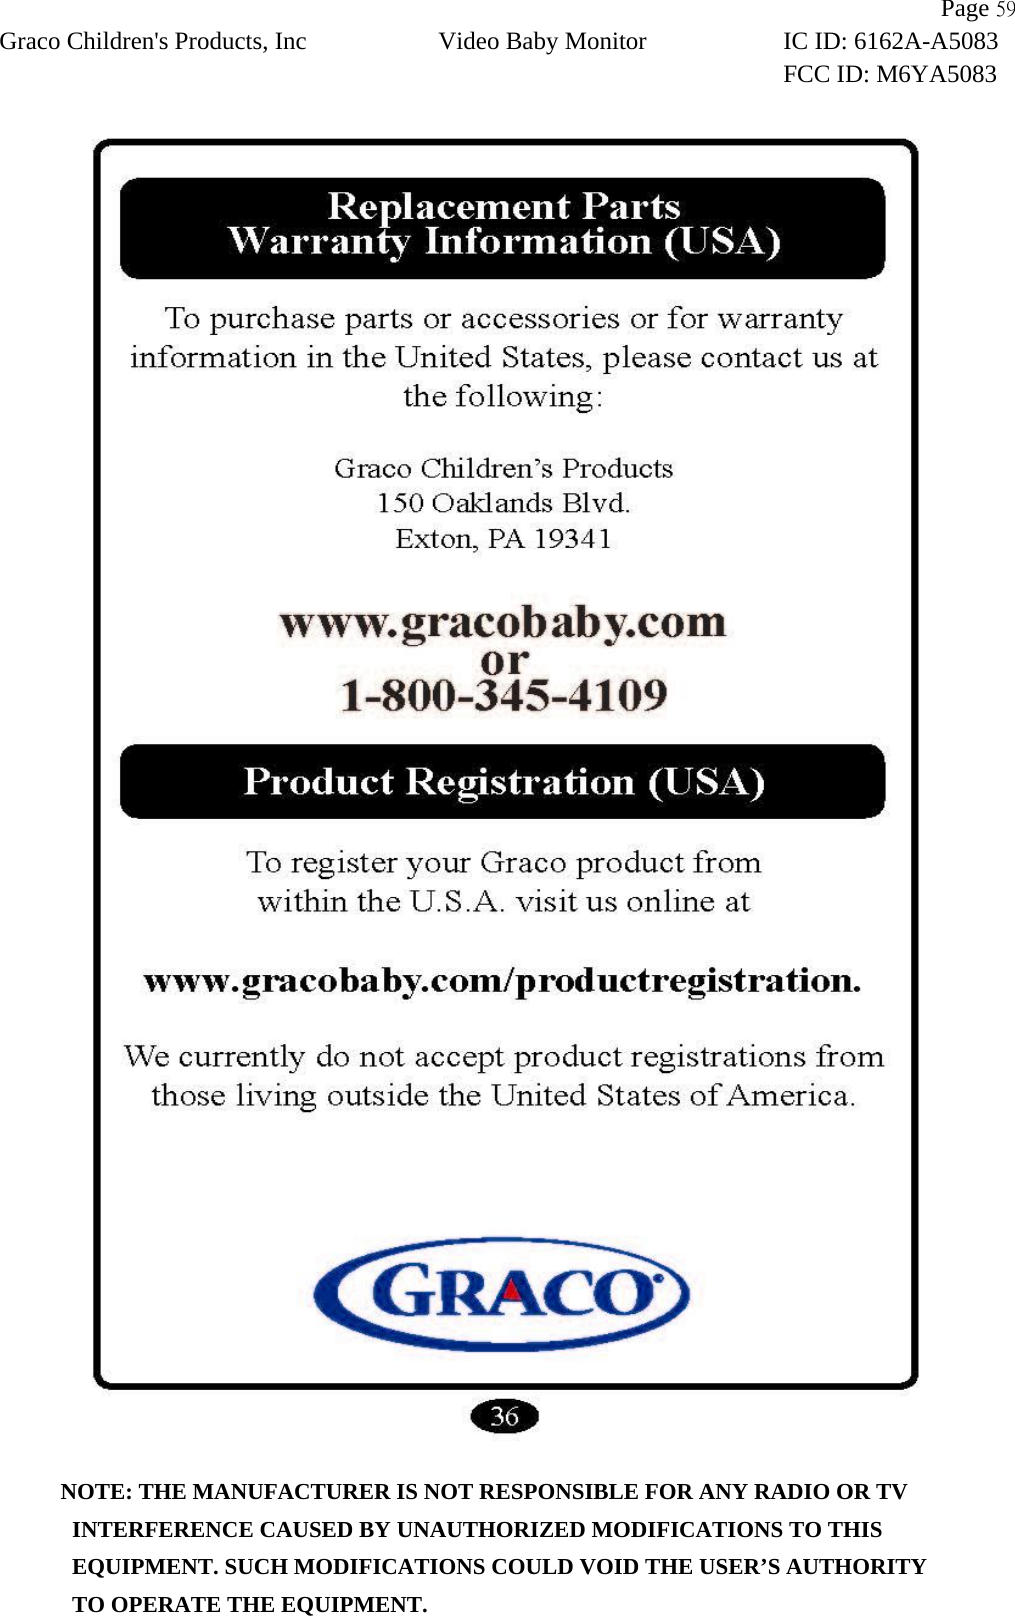                Page 59 Graco Children&apos;s Products, Inc Video Baby Monitor IC ID: 6162A-A5083 FCC ID: M6YA5083    NOTE: THE MANUFACTURER IS NOT RESPONSIBLE FOR ANY RADIO OR TV          INTERFERENCE CAUSED BY UNAUTHORIZED MODIFICATIONS TO THIS             EQUIPMENT. SUCH MODIFICATIONS COULD VOID THE USER’S AUTHORITY          TO OPERATE THE EQUIPMENT.  